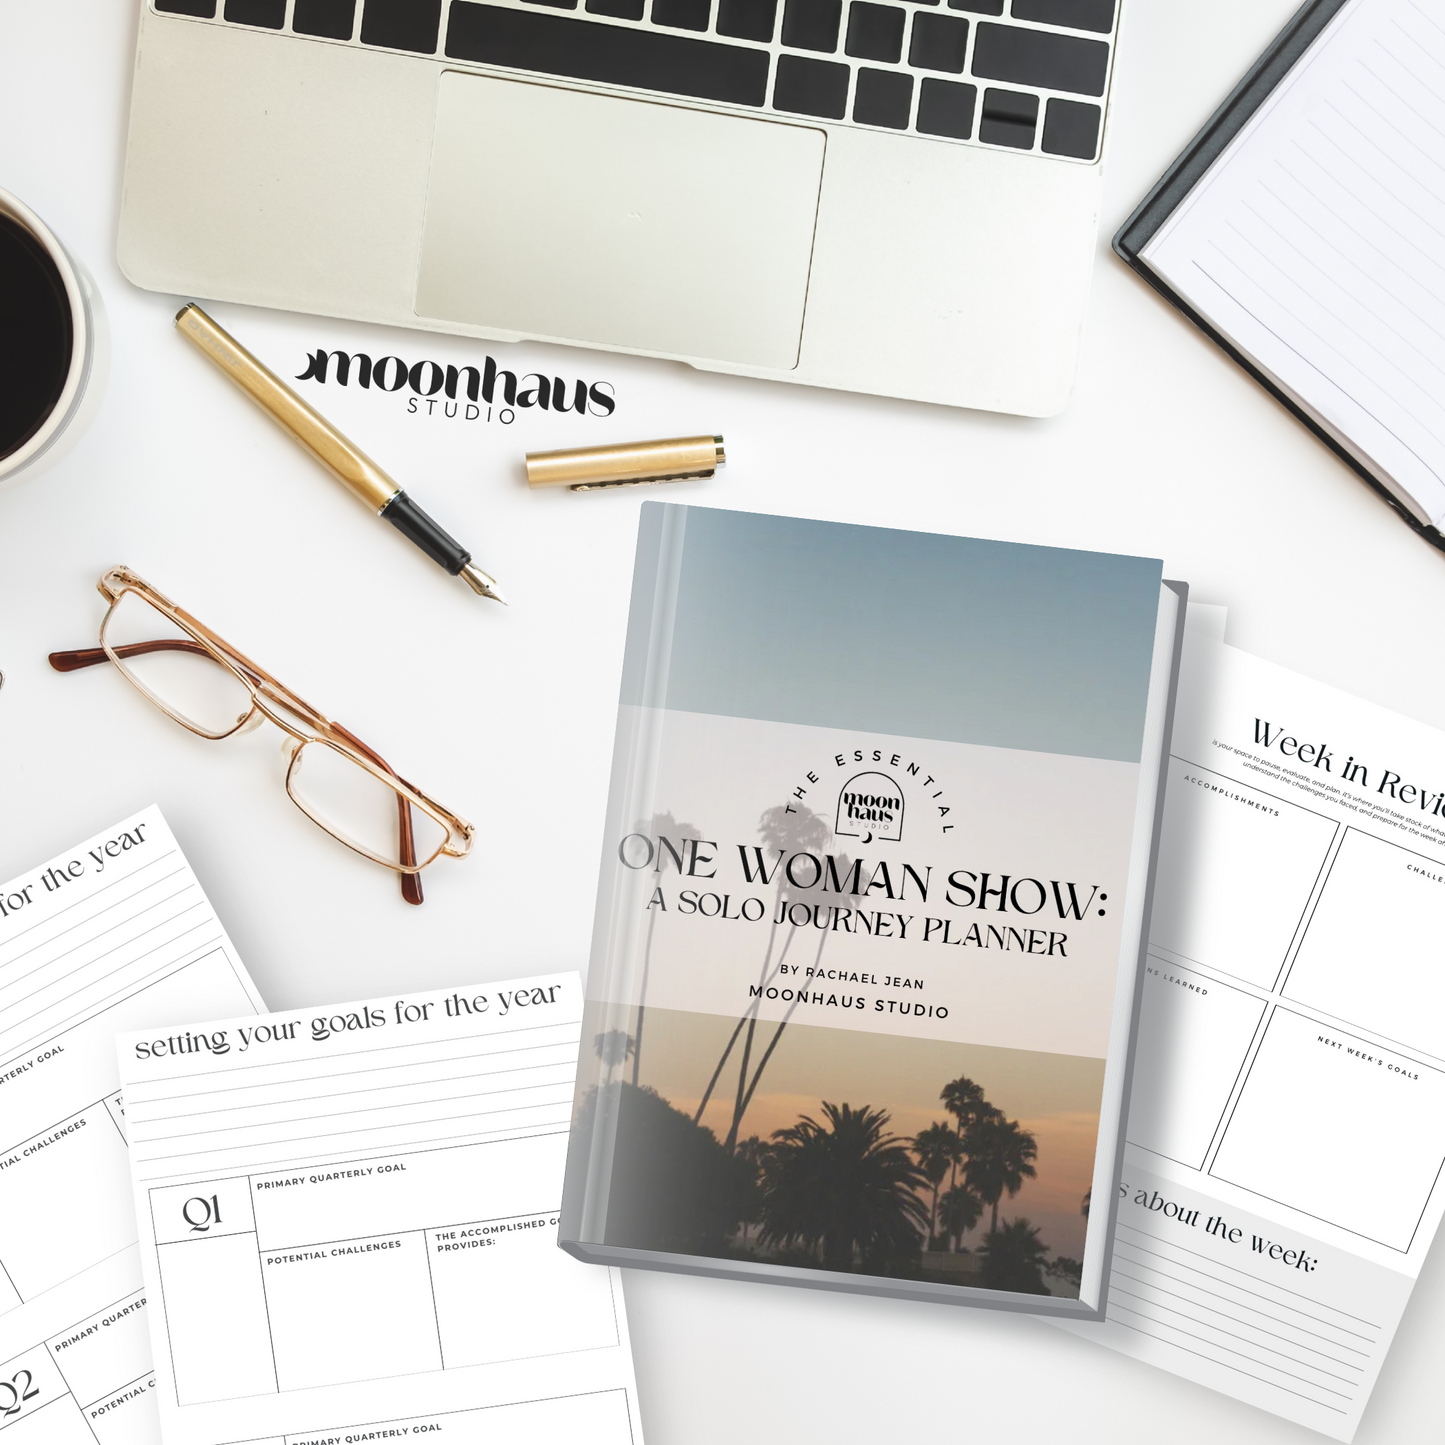 One Woman Show - A Business Planner for the Woman who Does It All